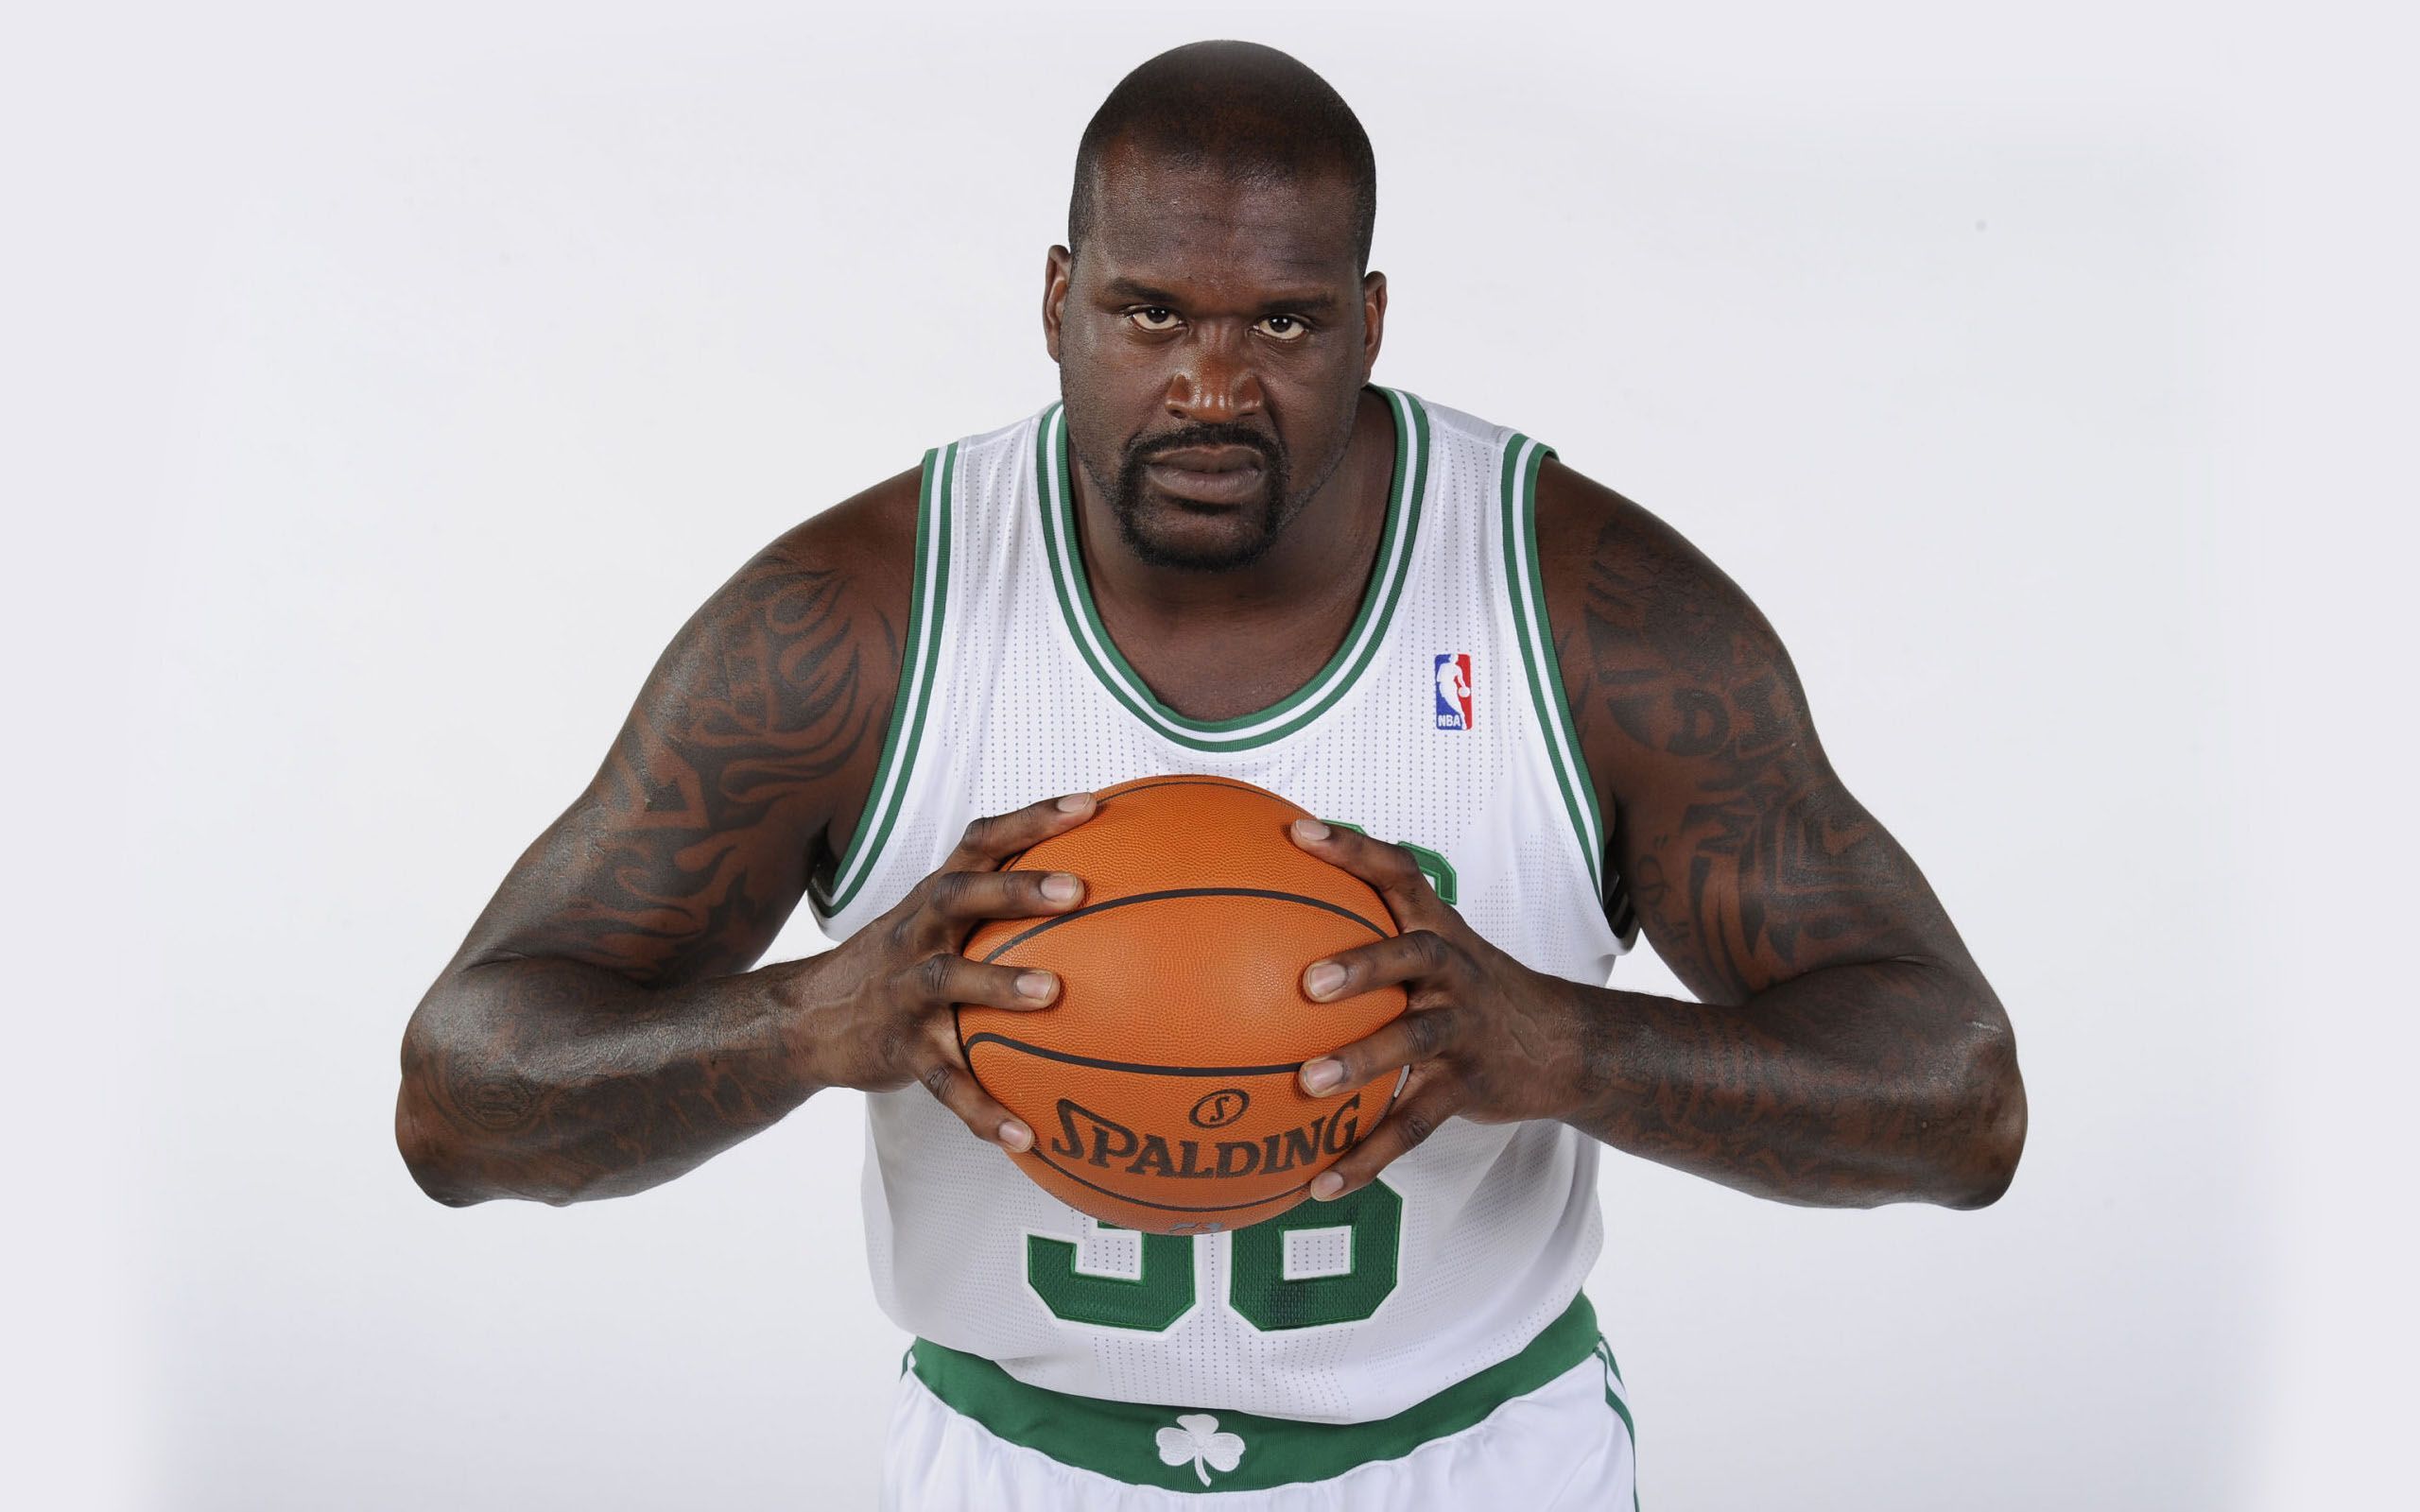 Shaquille O Neal Basketball Player Nba Photo Gallery For